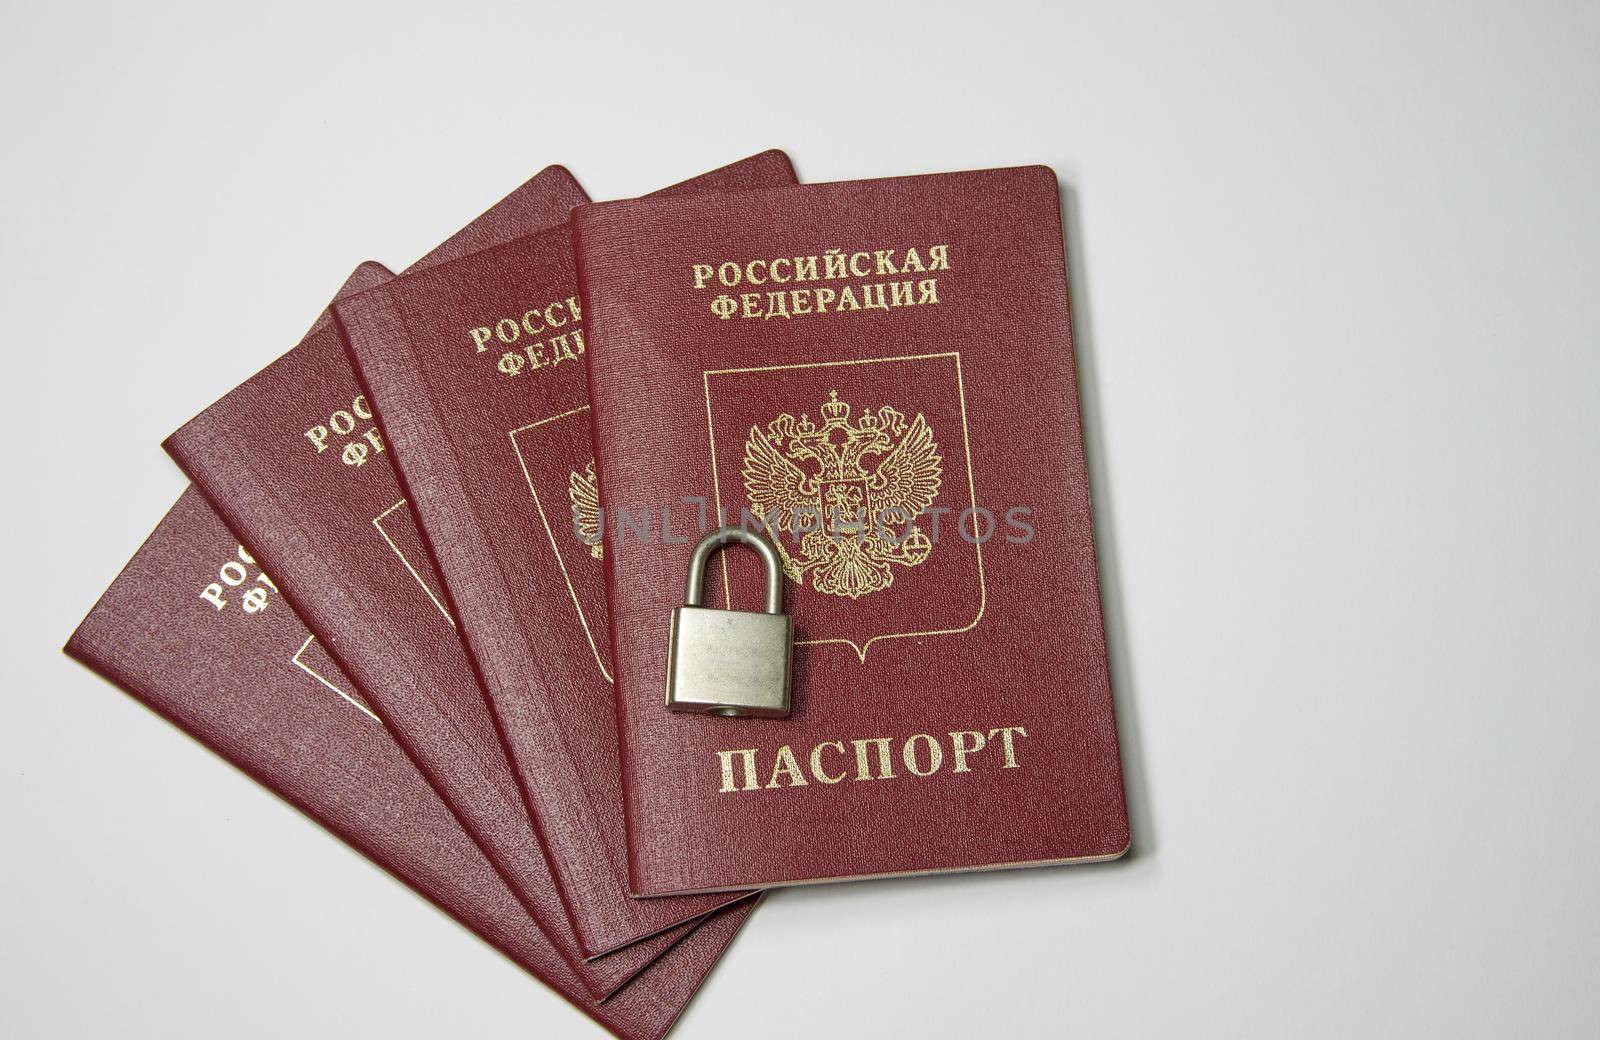 ban on leaving Russia, passports under lock and key.